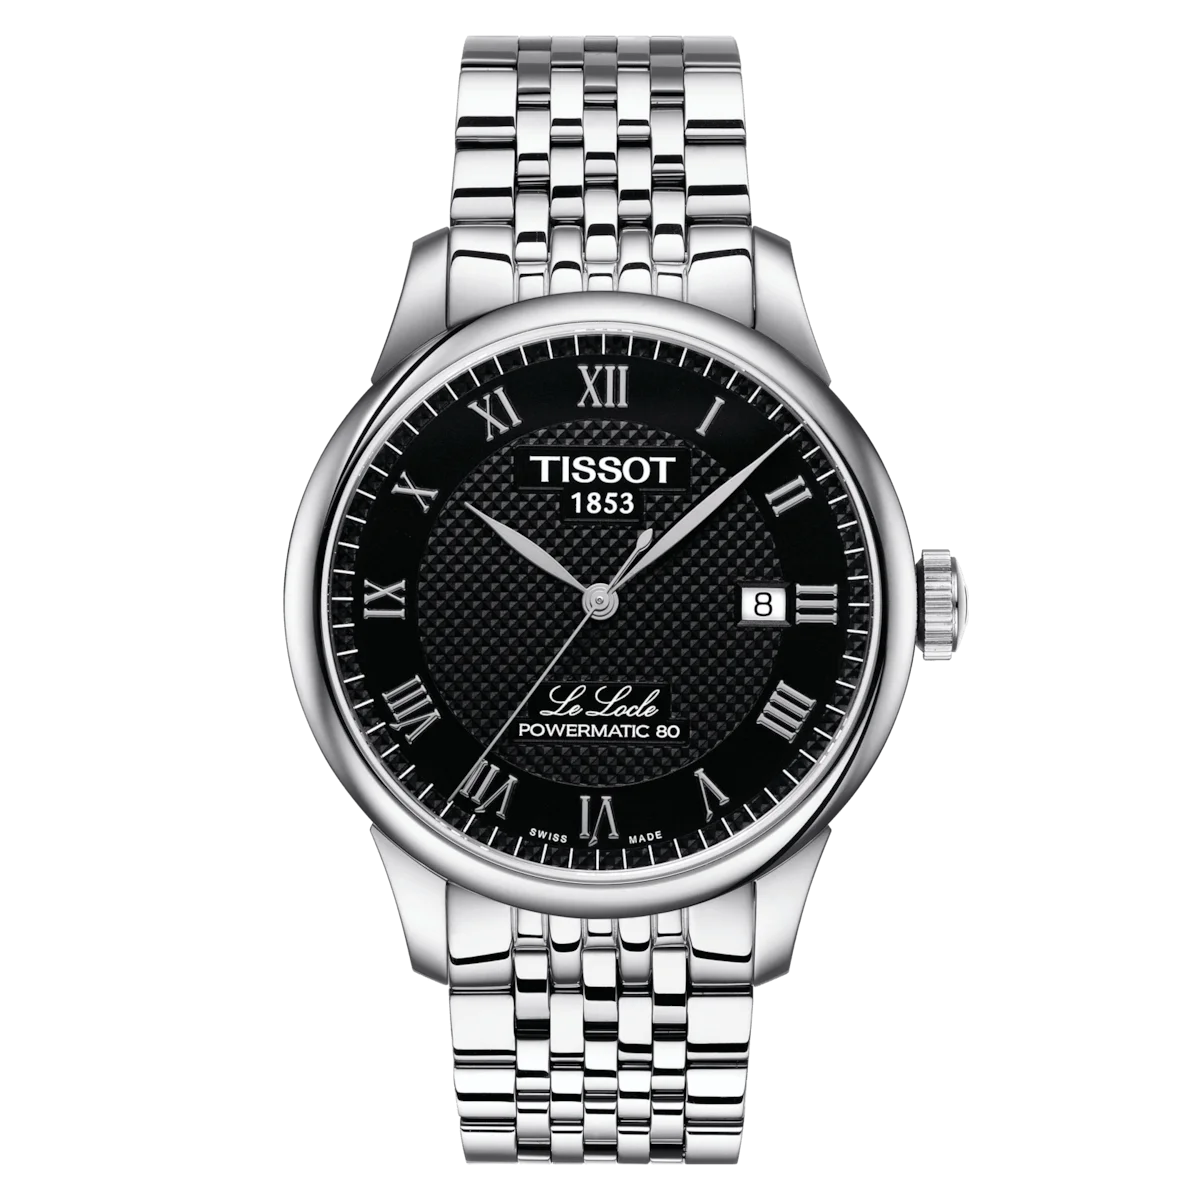 Tissot Le Locle Powermatic 80 Gents Automatic Black Dial watch with Roman numeral indexes. Date function at 3 o'clock position. Stainless steel case and bracelet. Front Image. T006.407.11.053.00